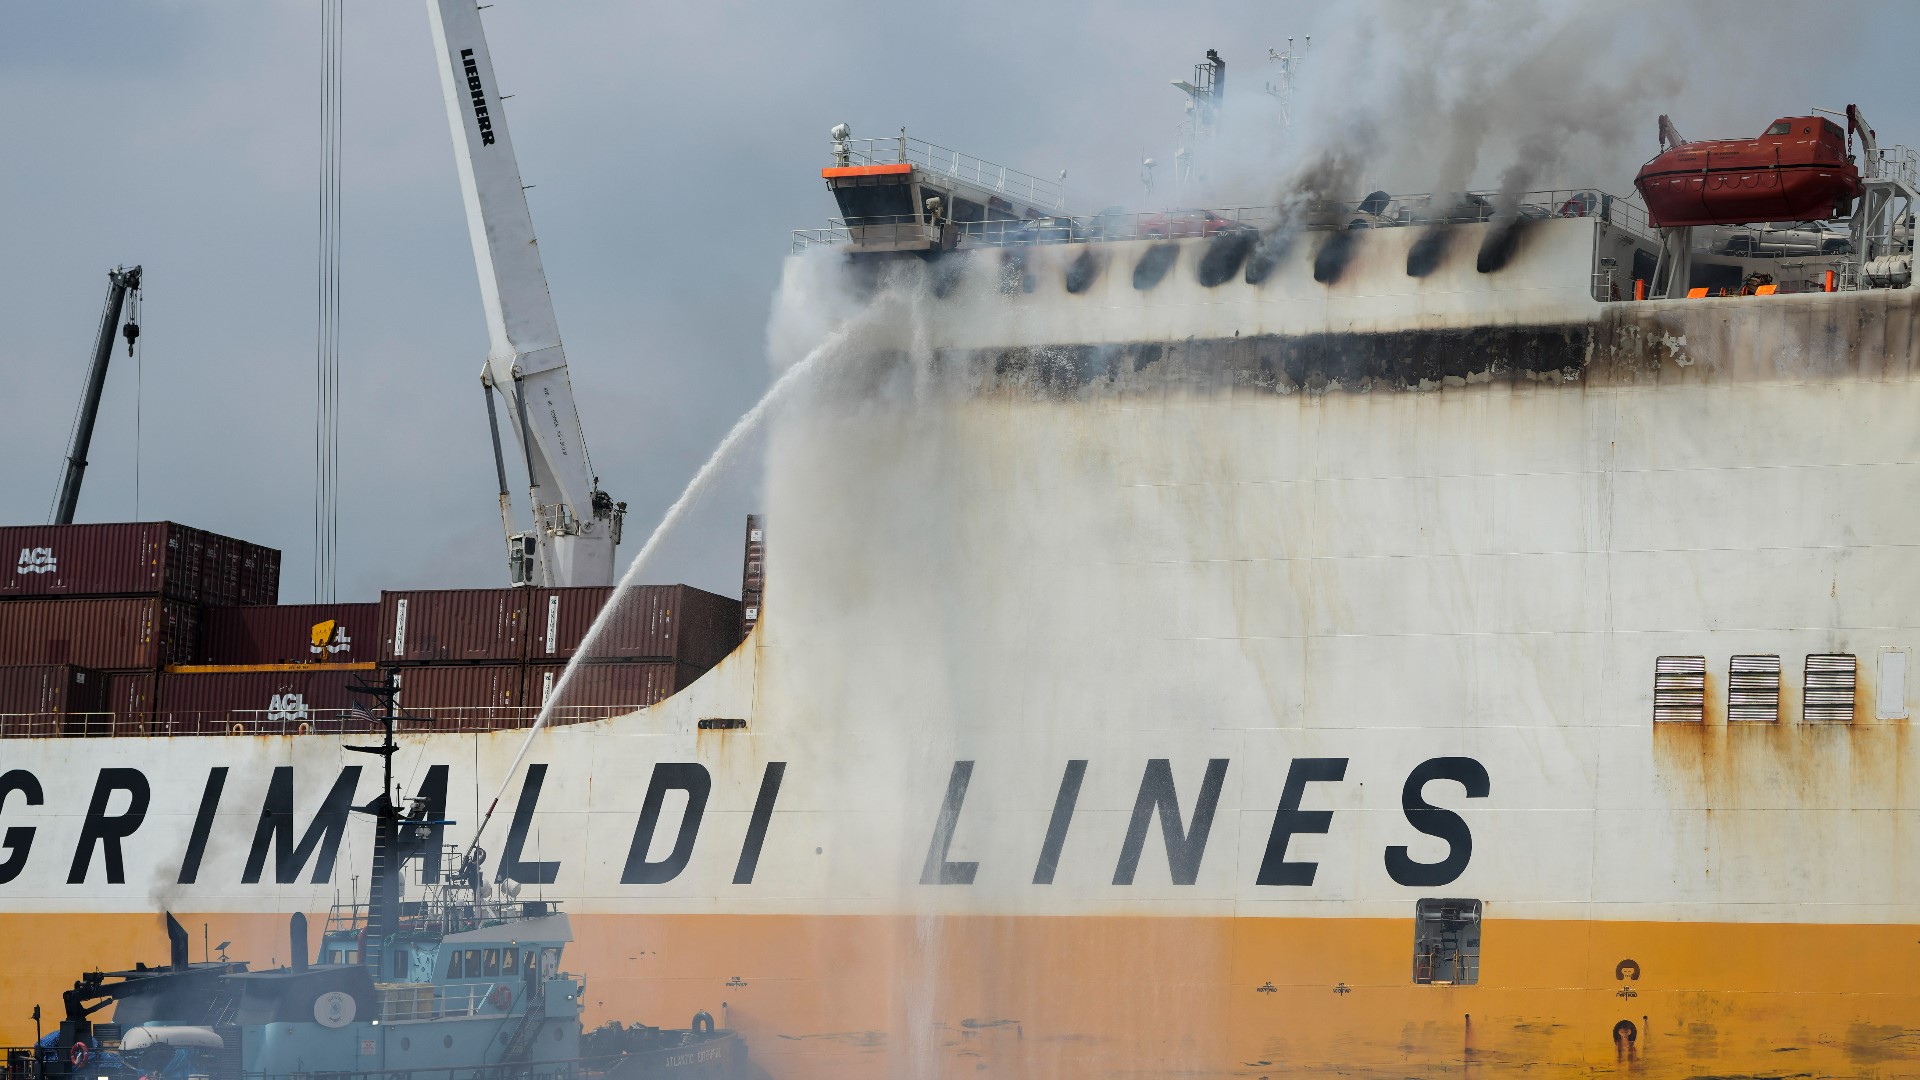 A cargo ship burned for a third day Friday at a New Jersey port after the fire claimed the lives of two firefighters.